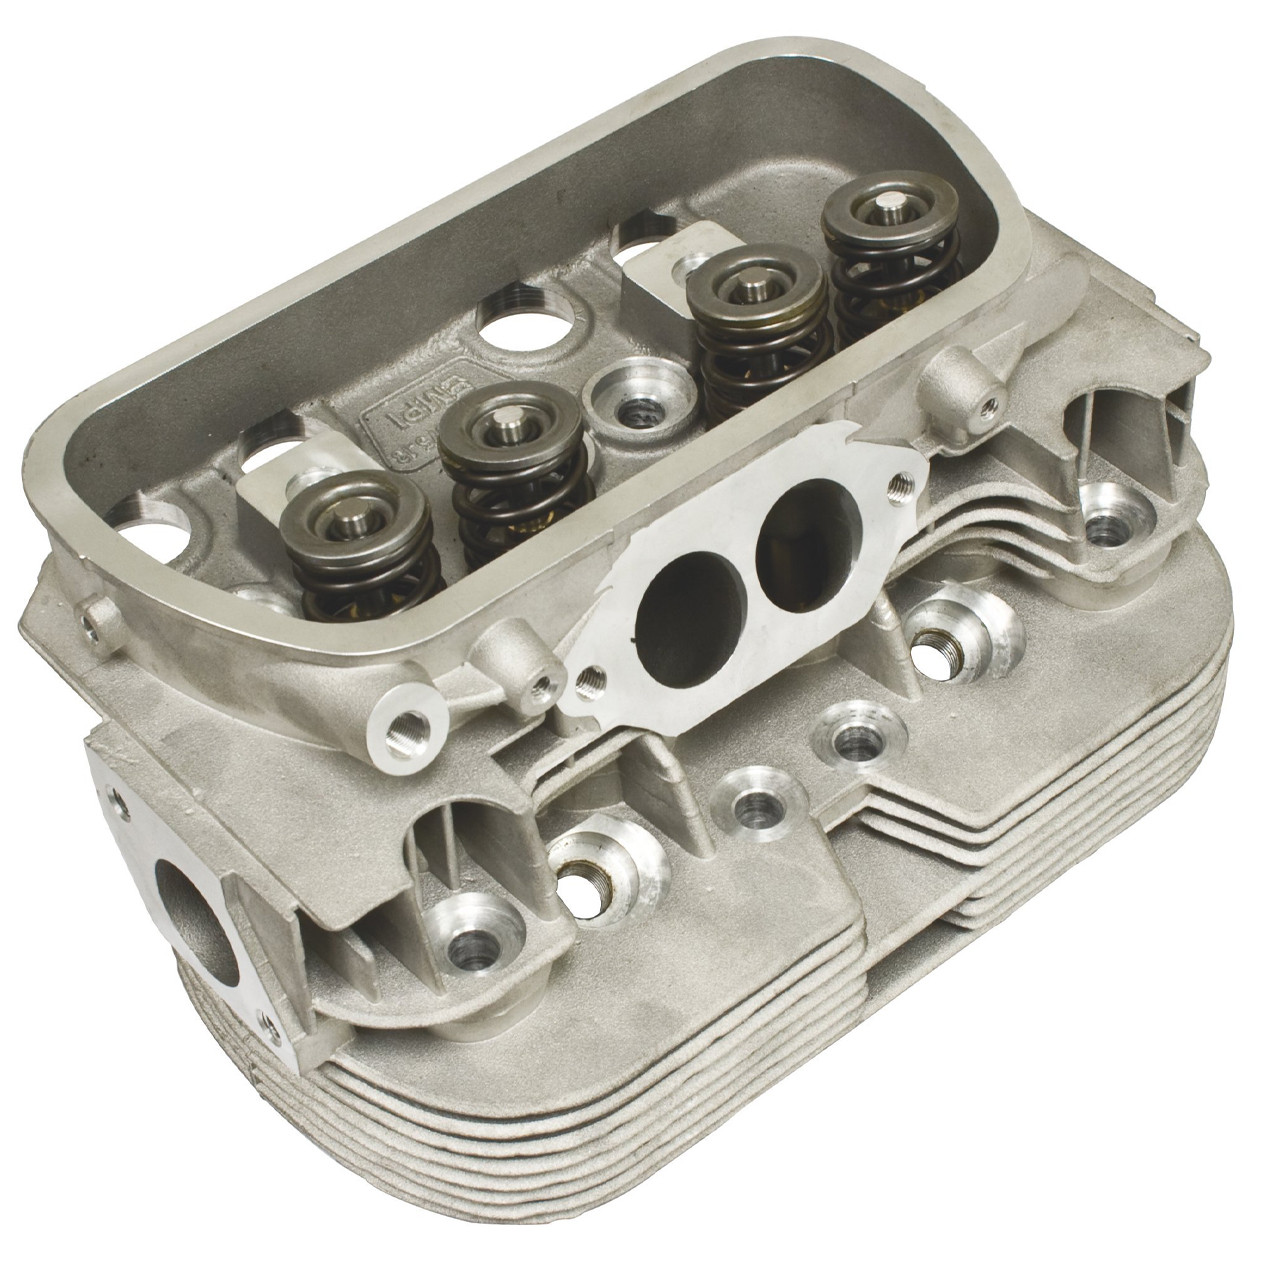 C13-98-1356-B - EMPI - 043-101-355-C 043101355C - COMPLETE DUAL PORT  CYLINDER HEAD - WITH 14MM x 1/2 IN. SPARK PLUG HOLE - STOCK 1600CC  BEETLE/GHIA 